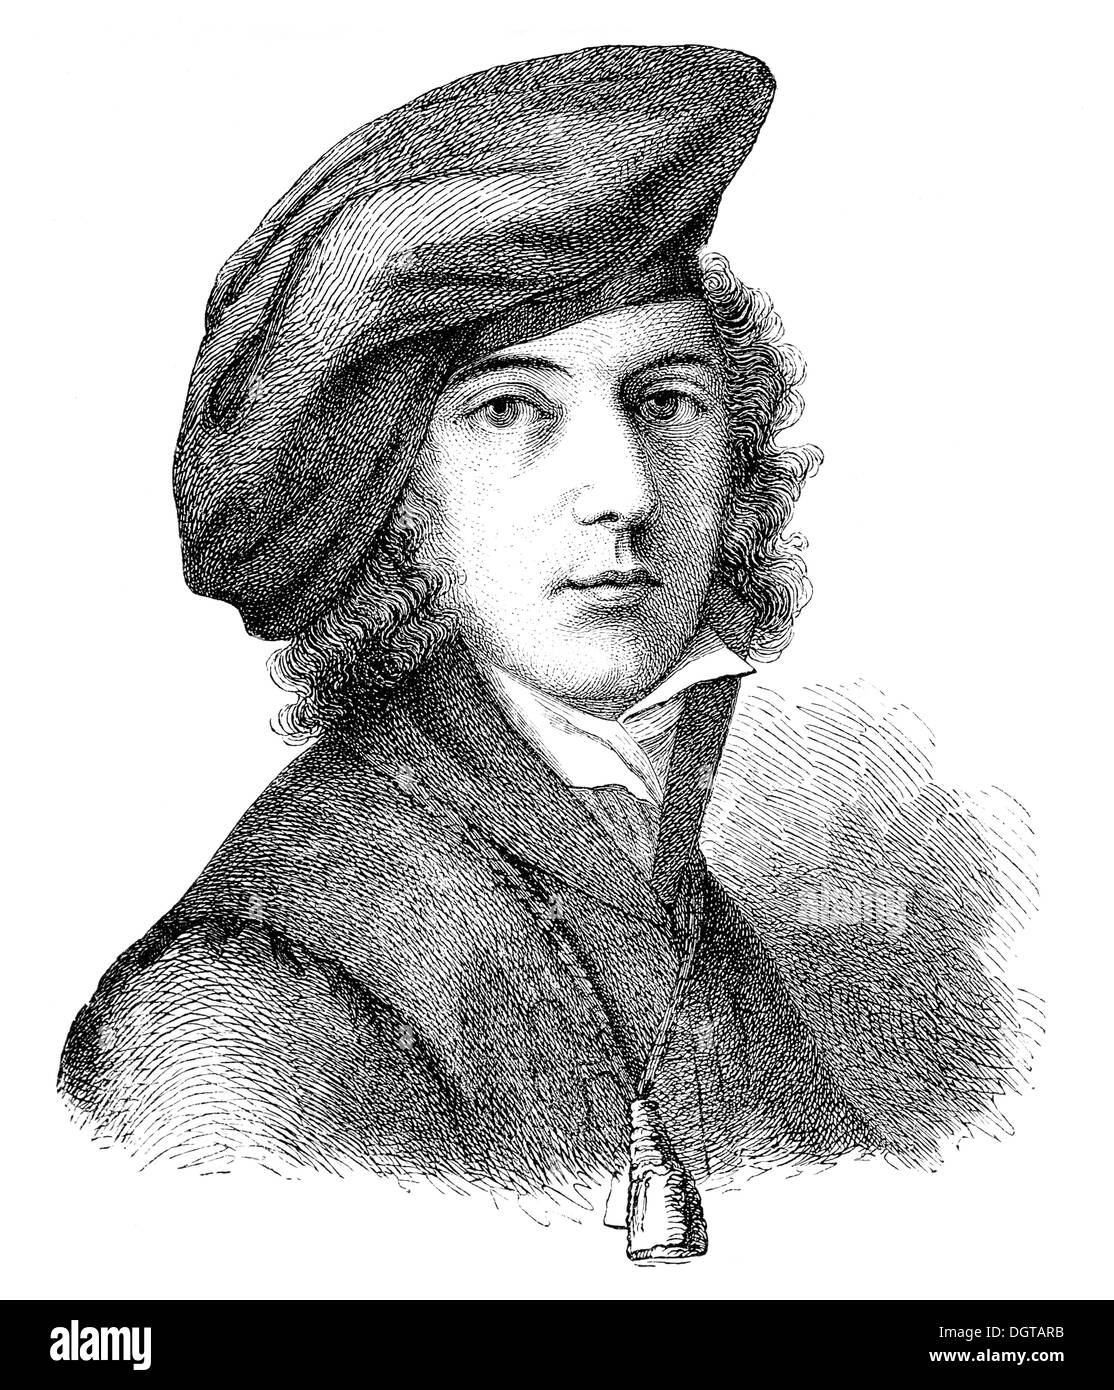 Chamisso's youthful portrait, painted in 1805 by Ernst Theodor Amadeus Hoffmann, historic illustration from Deutsche Stock Photo